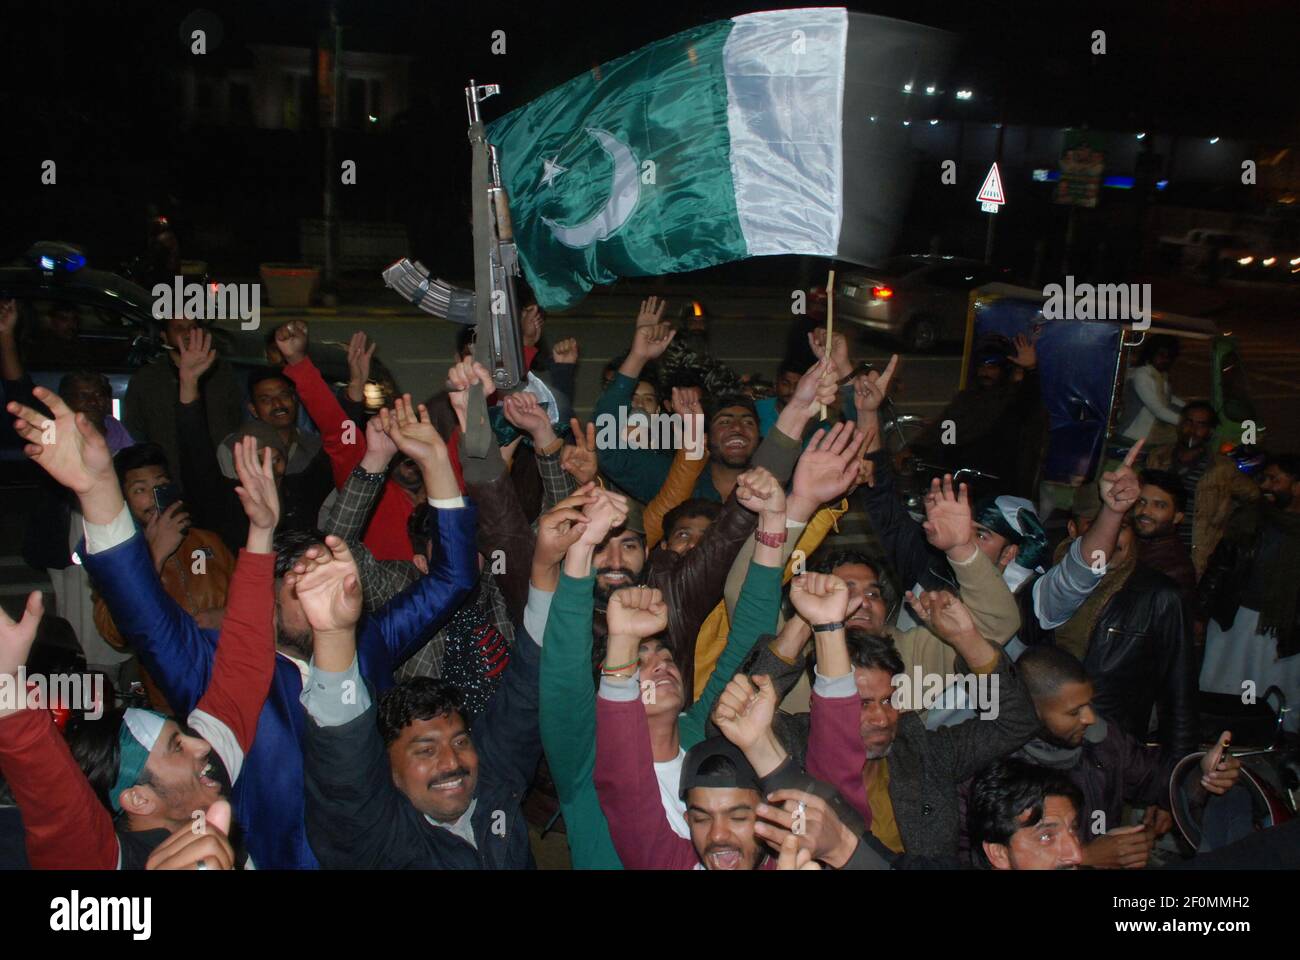 Citizens & civil society celebrates during a rally chant slogans in favor of Pakistan Army hold Pakistan flag after the Pakistan Air Force shot down two Indian jets for violating Pakistan’s airspace on Faisal Chowk Mall Road in Lahore on Febuary 27, 2019. Pakistan's military said Wednesday it shot down two Indian warplanes in the disputed region of Kashmir and captured two pilots, raising tensions between the nuclear-armed rivals to a level unseen in 20 years. (Photo by Rana Sajid Hussain / Pacific Press/Sipa USA) Stock Photo